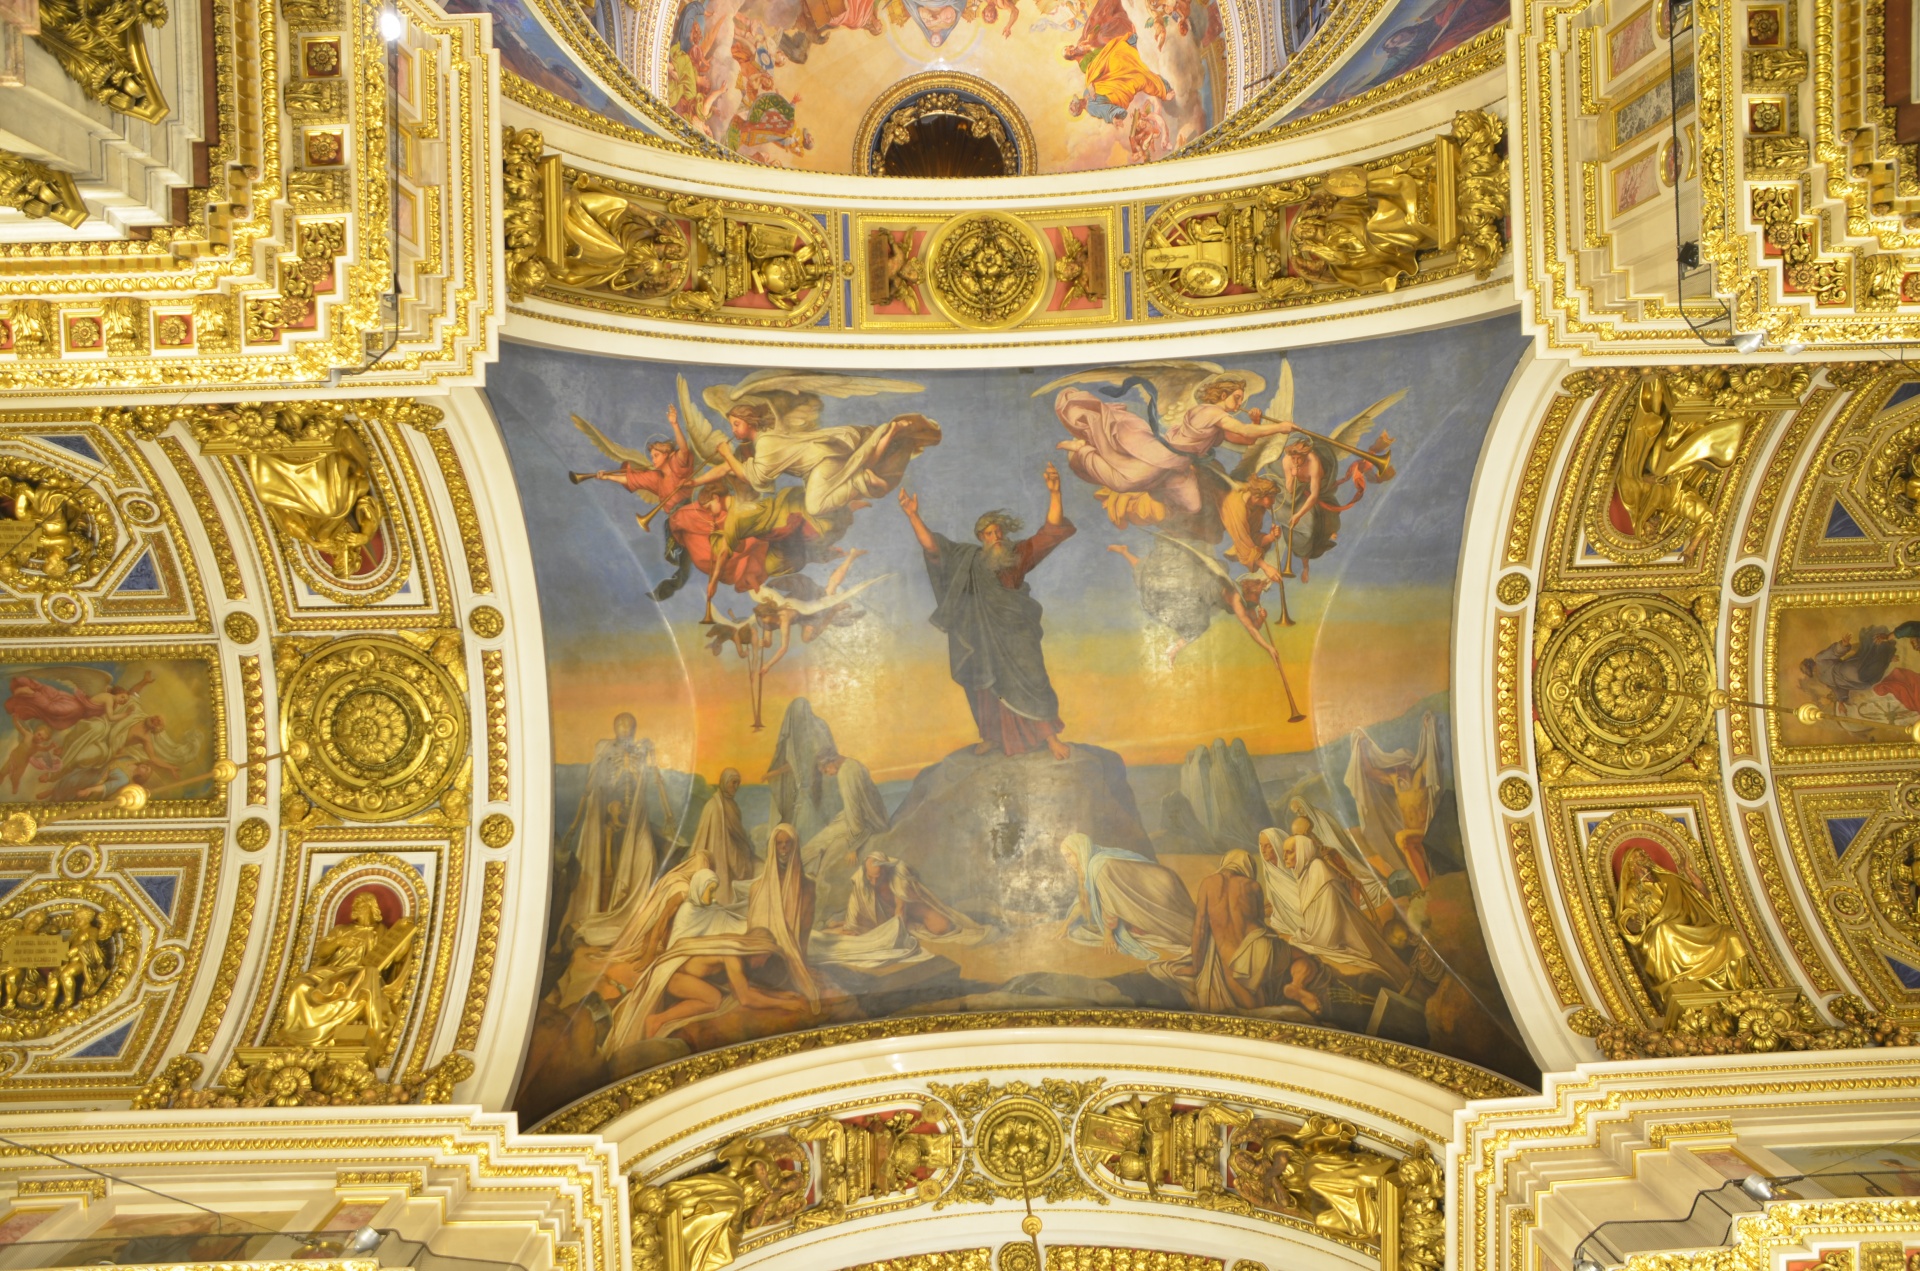 St. Isaac's Cathedral Interior